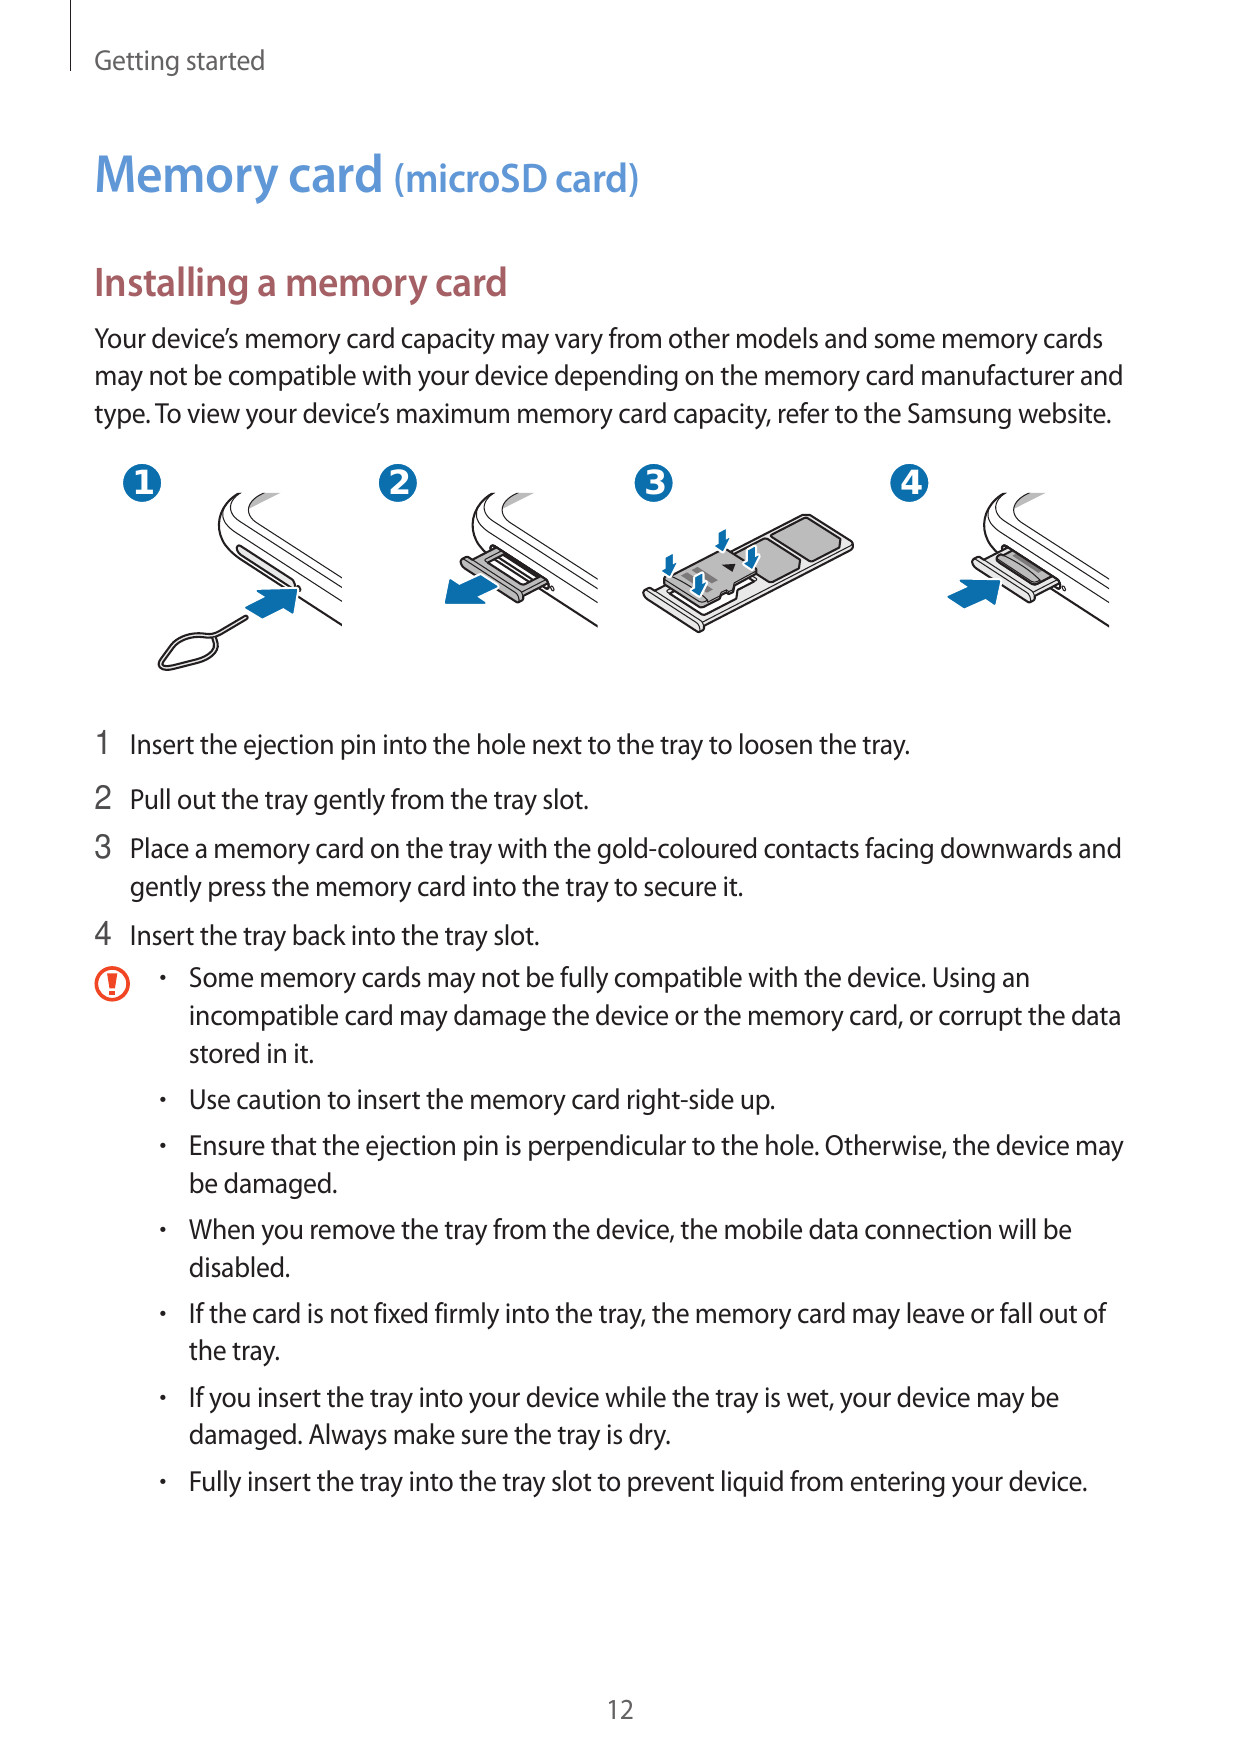 Getting startedMemory card (microSD card)Installing a memory cardYour device’s memory card capacity may vary from other models a